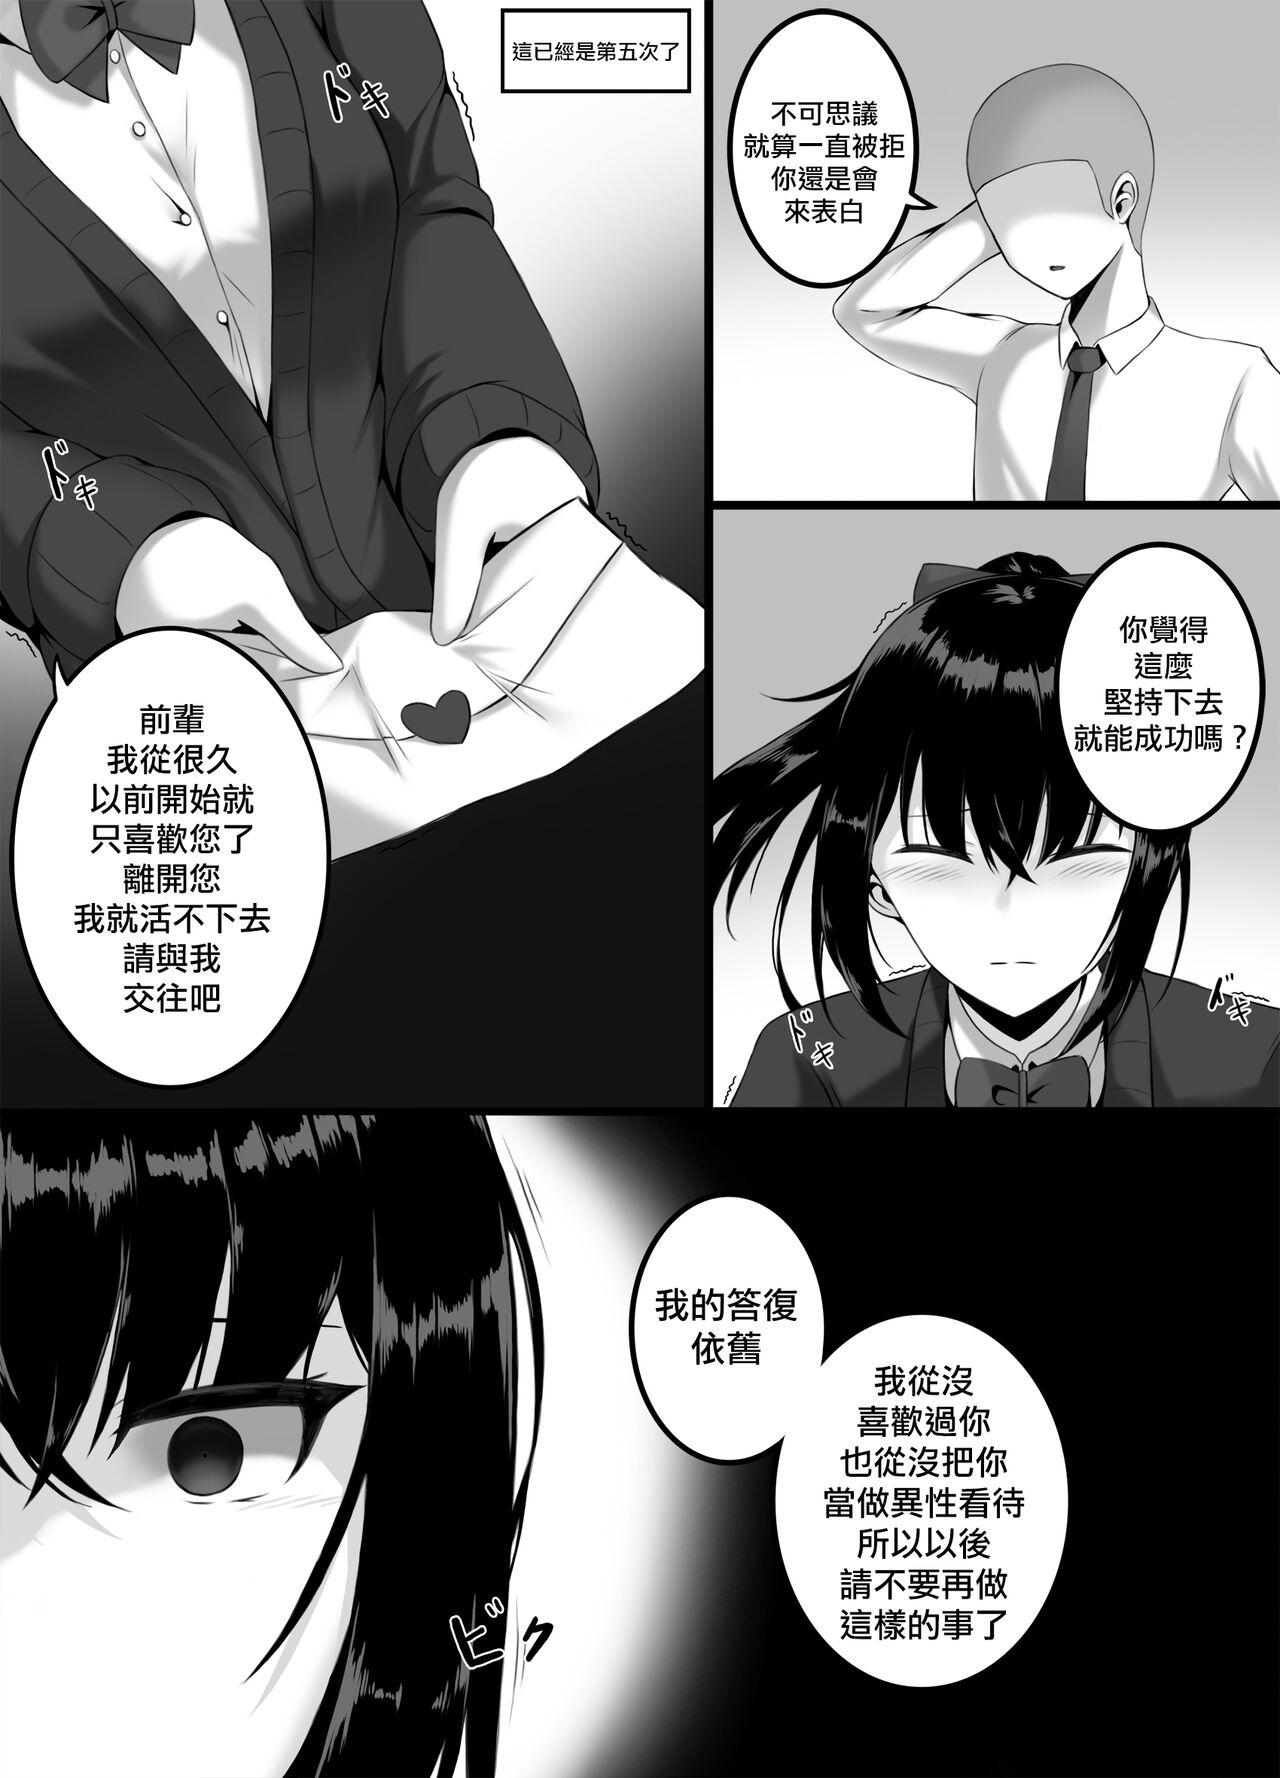 Mature Yandere girl Thailand - Page 2